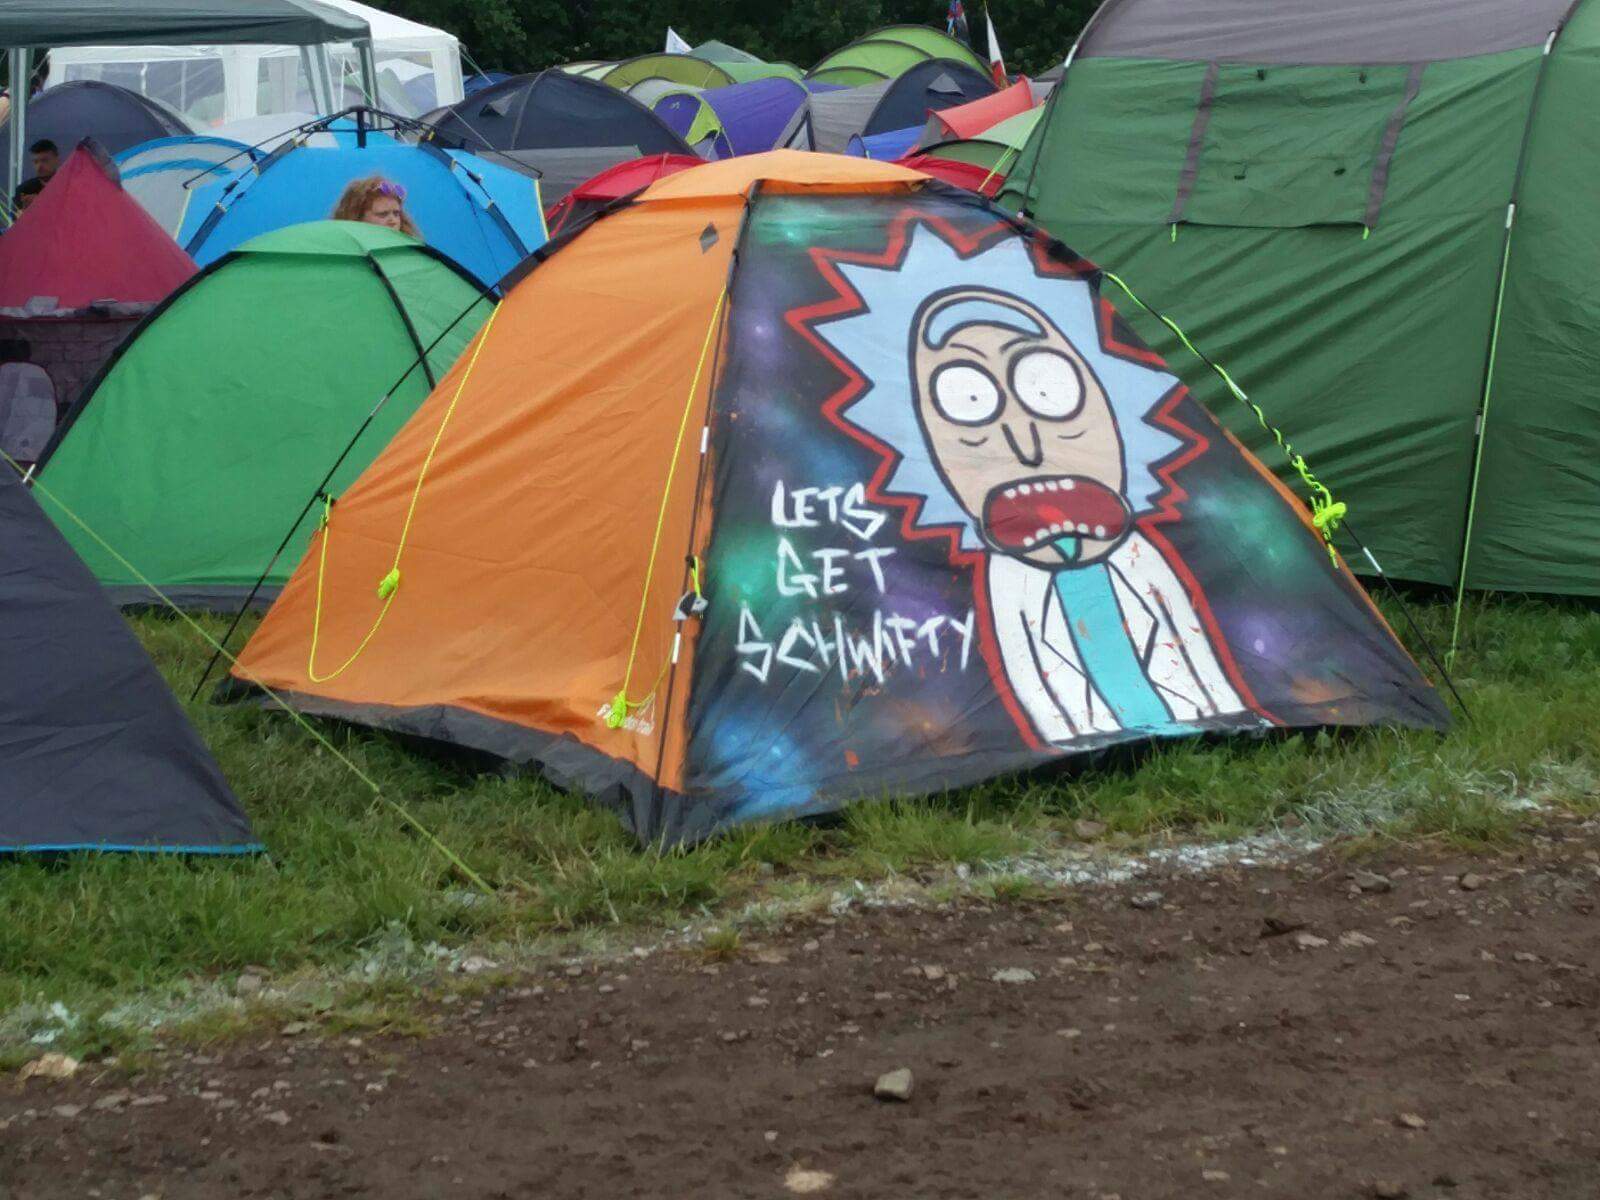 Let’s get schwifty festival tent